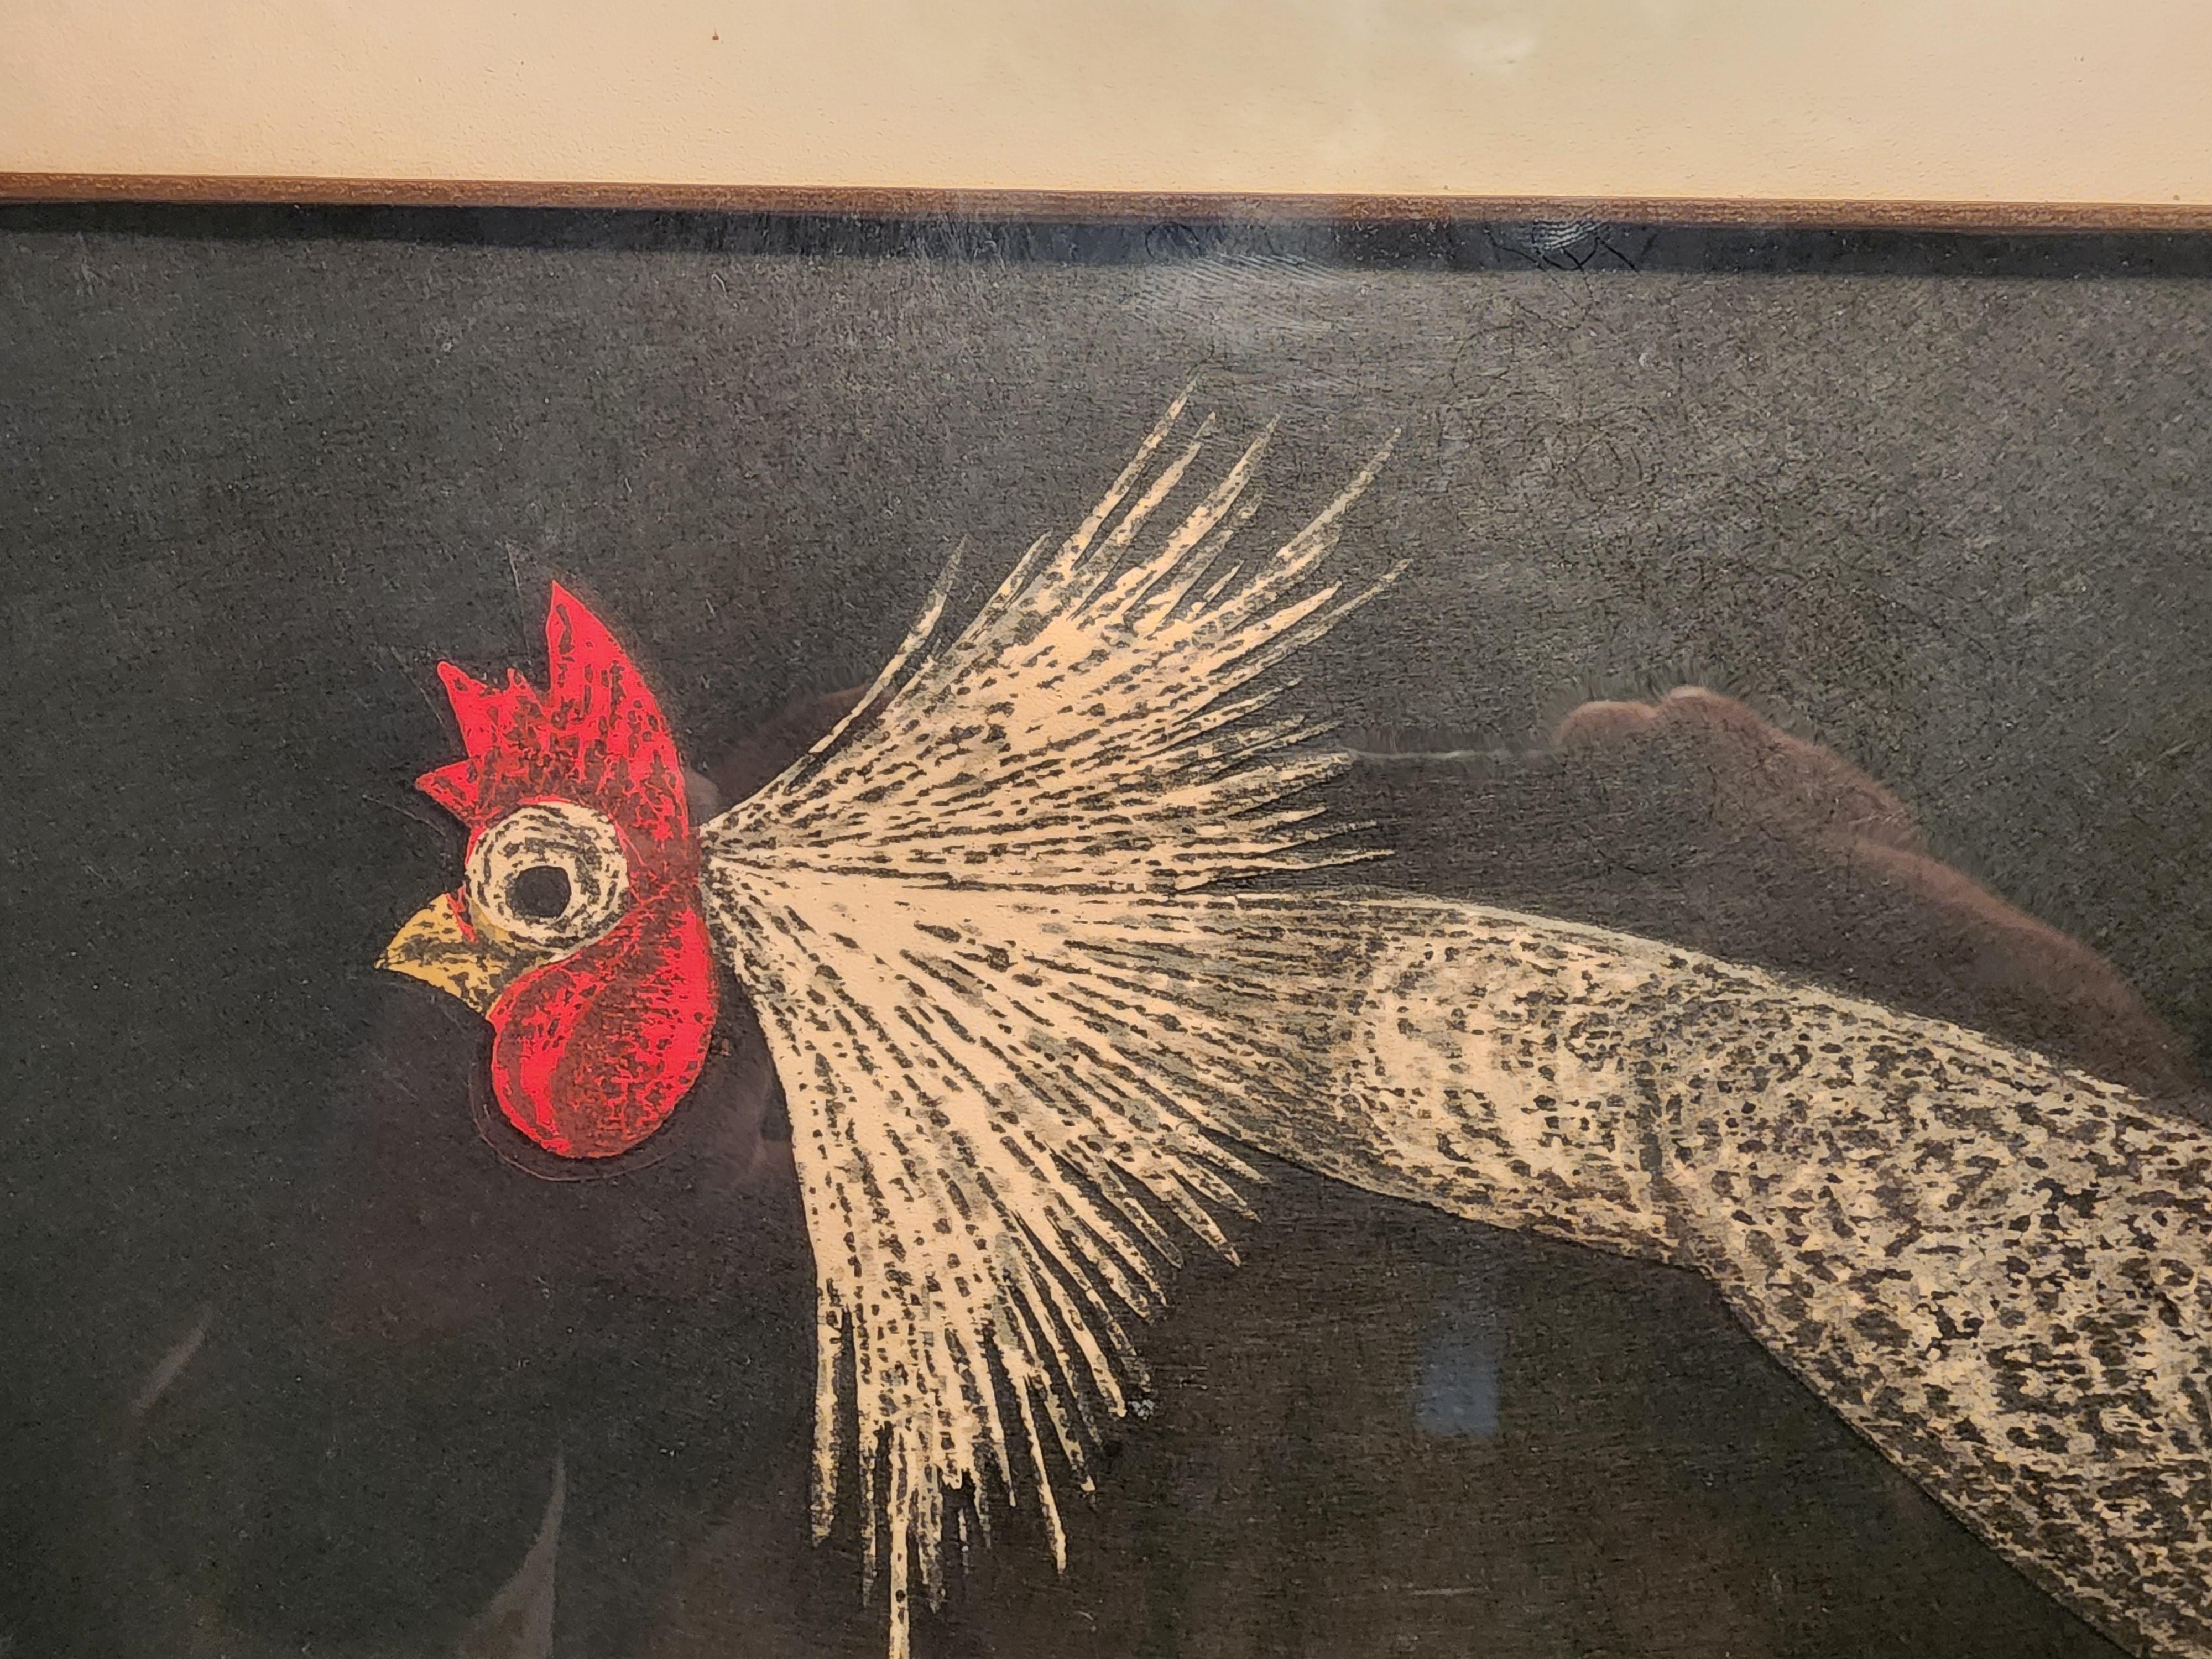 Japanese wood block print of a rooster or cocktail in sosakuhanga.
Signed in pencil lower right within the image.
Frame is acceptable, but has some scratches as shown in the photos.